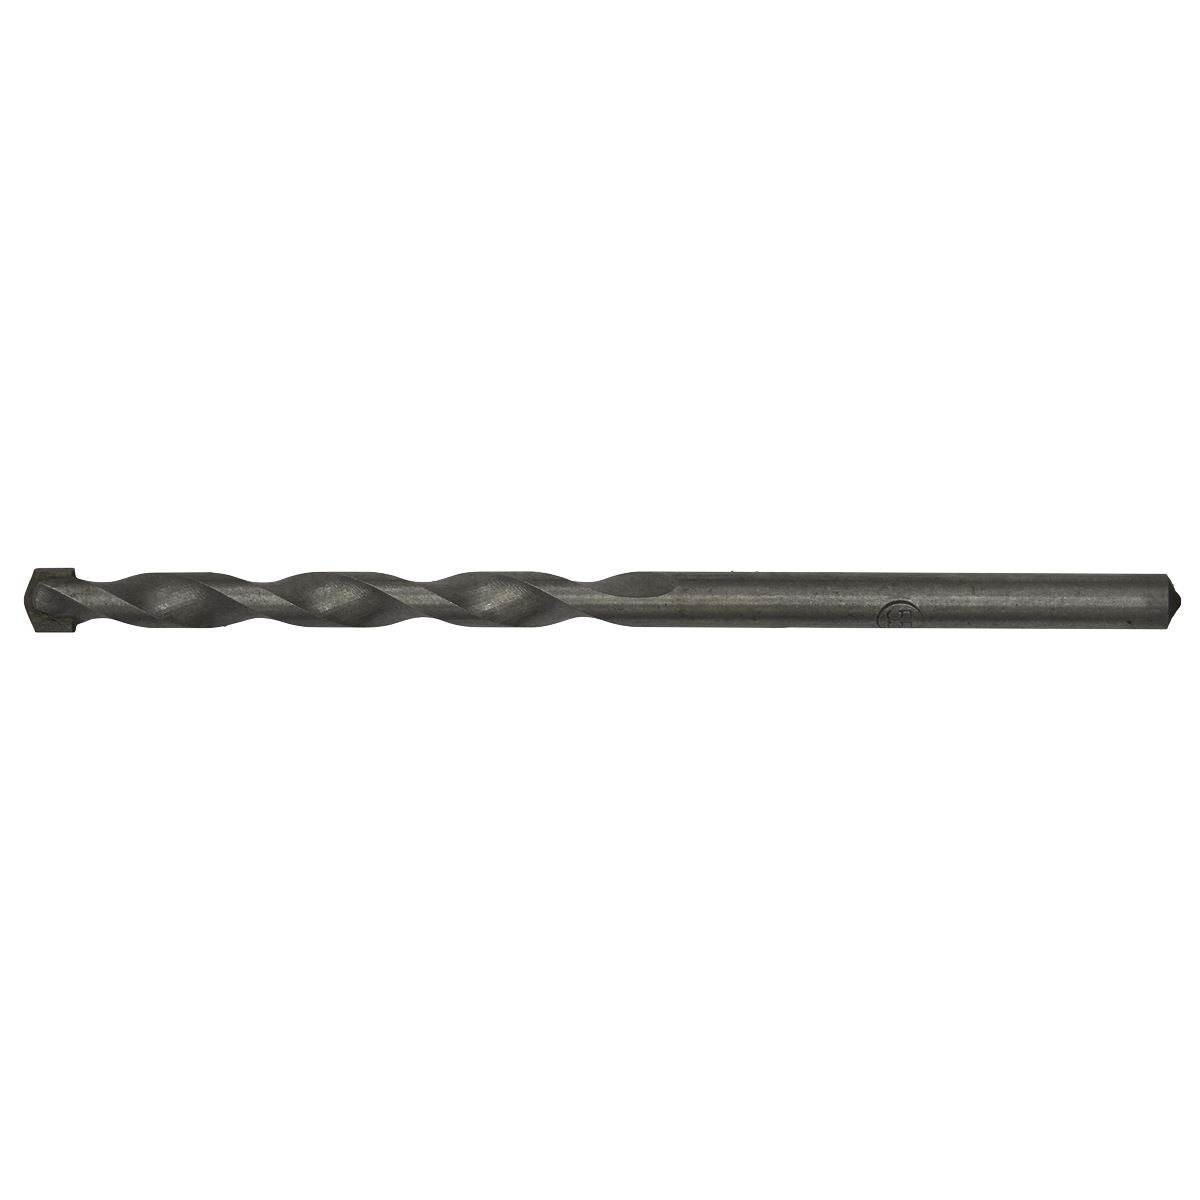 Worksafe by Sealey Straight Shank Rotary Impact Drill Bit Ø5.5 x 100mm